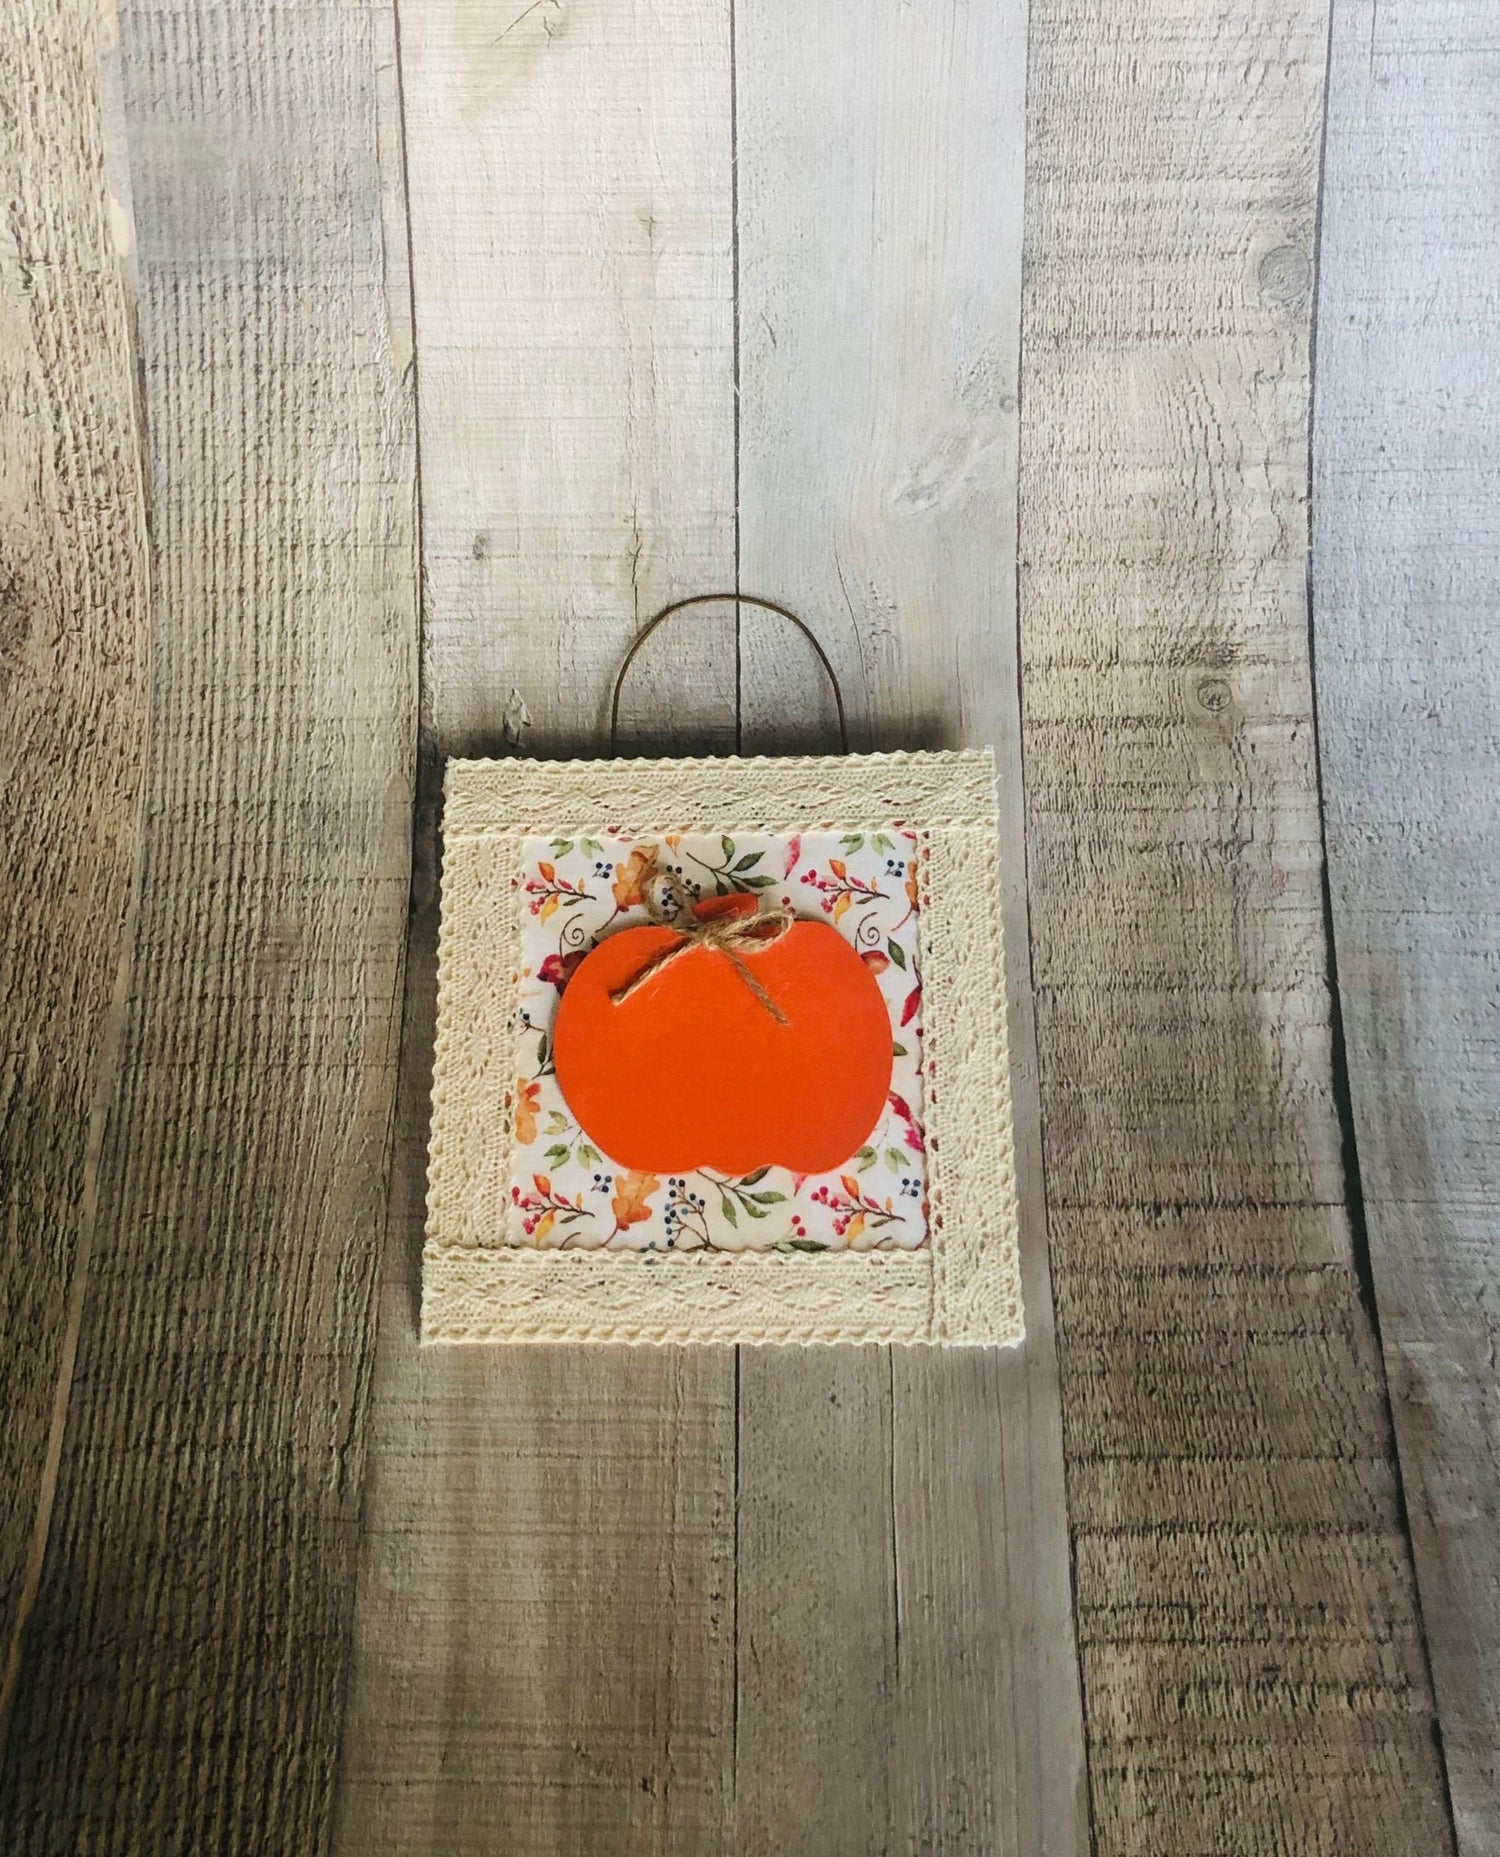 finished pumpkin hanging craft from seniorlycreations.com. Simple crafts for seniors.